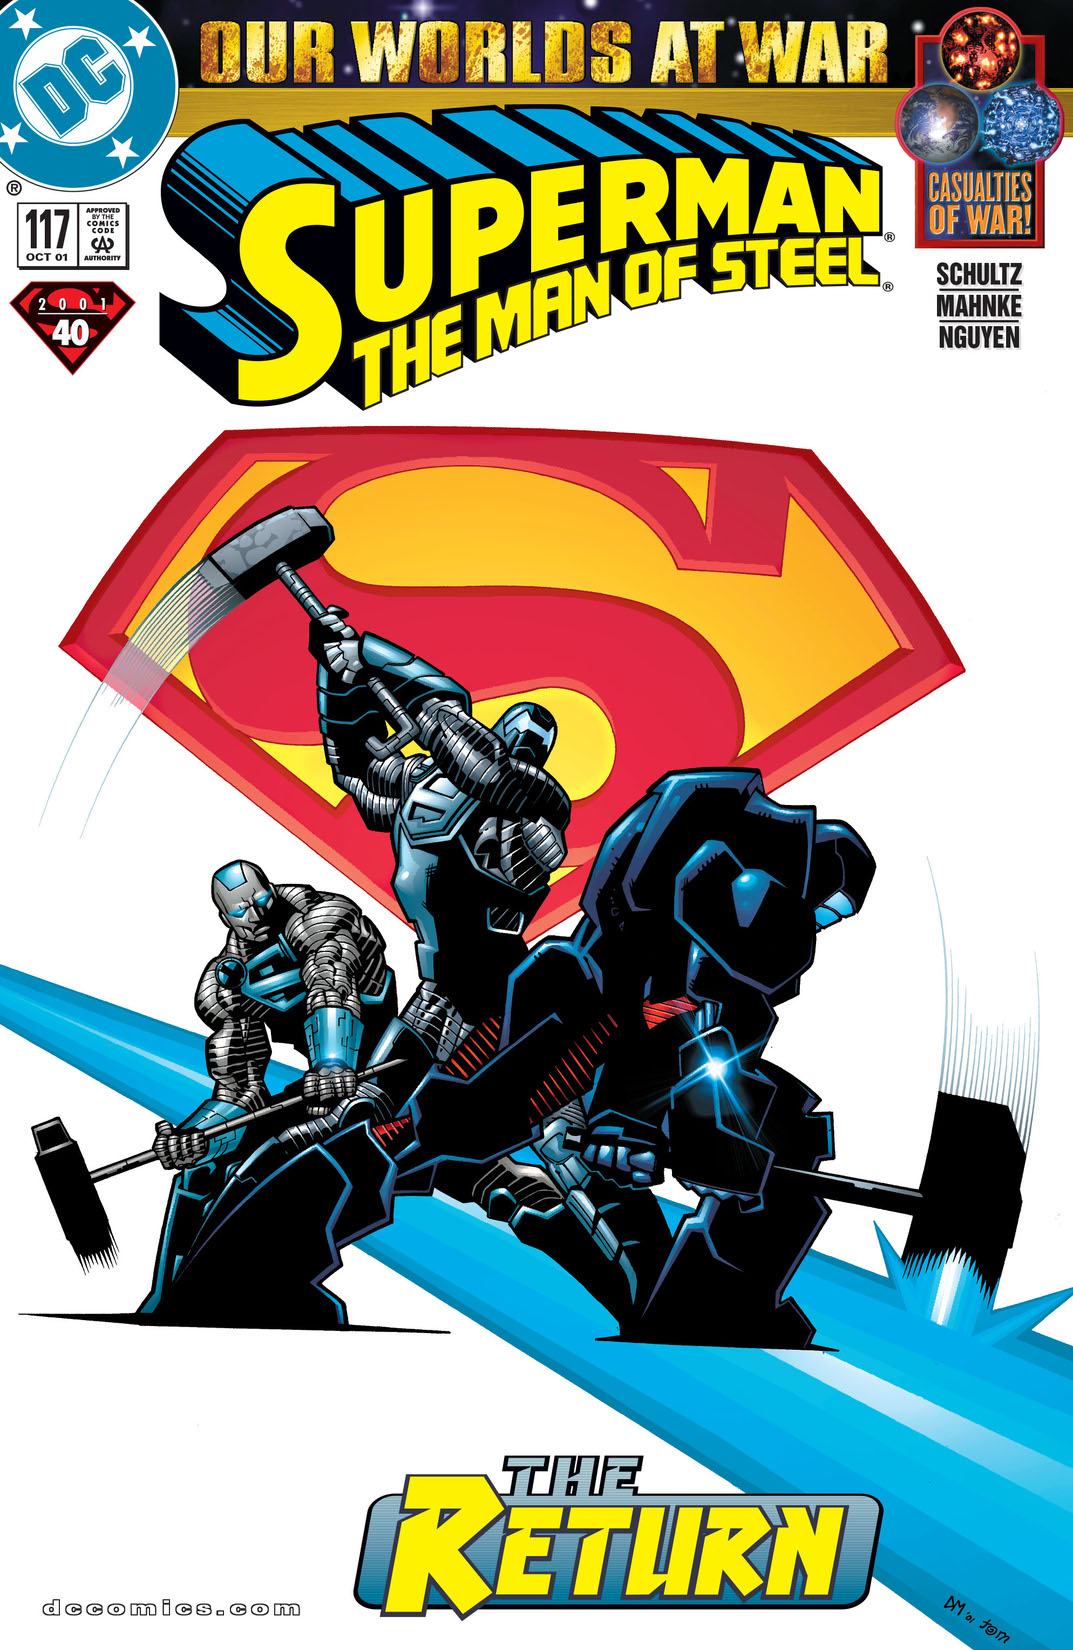 Superman: The Man of Steel #117 preview images